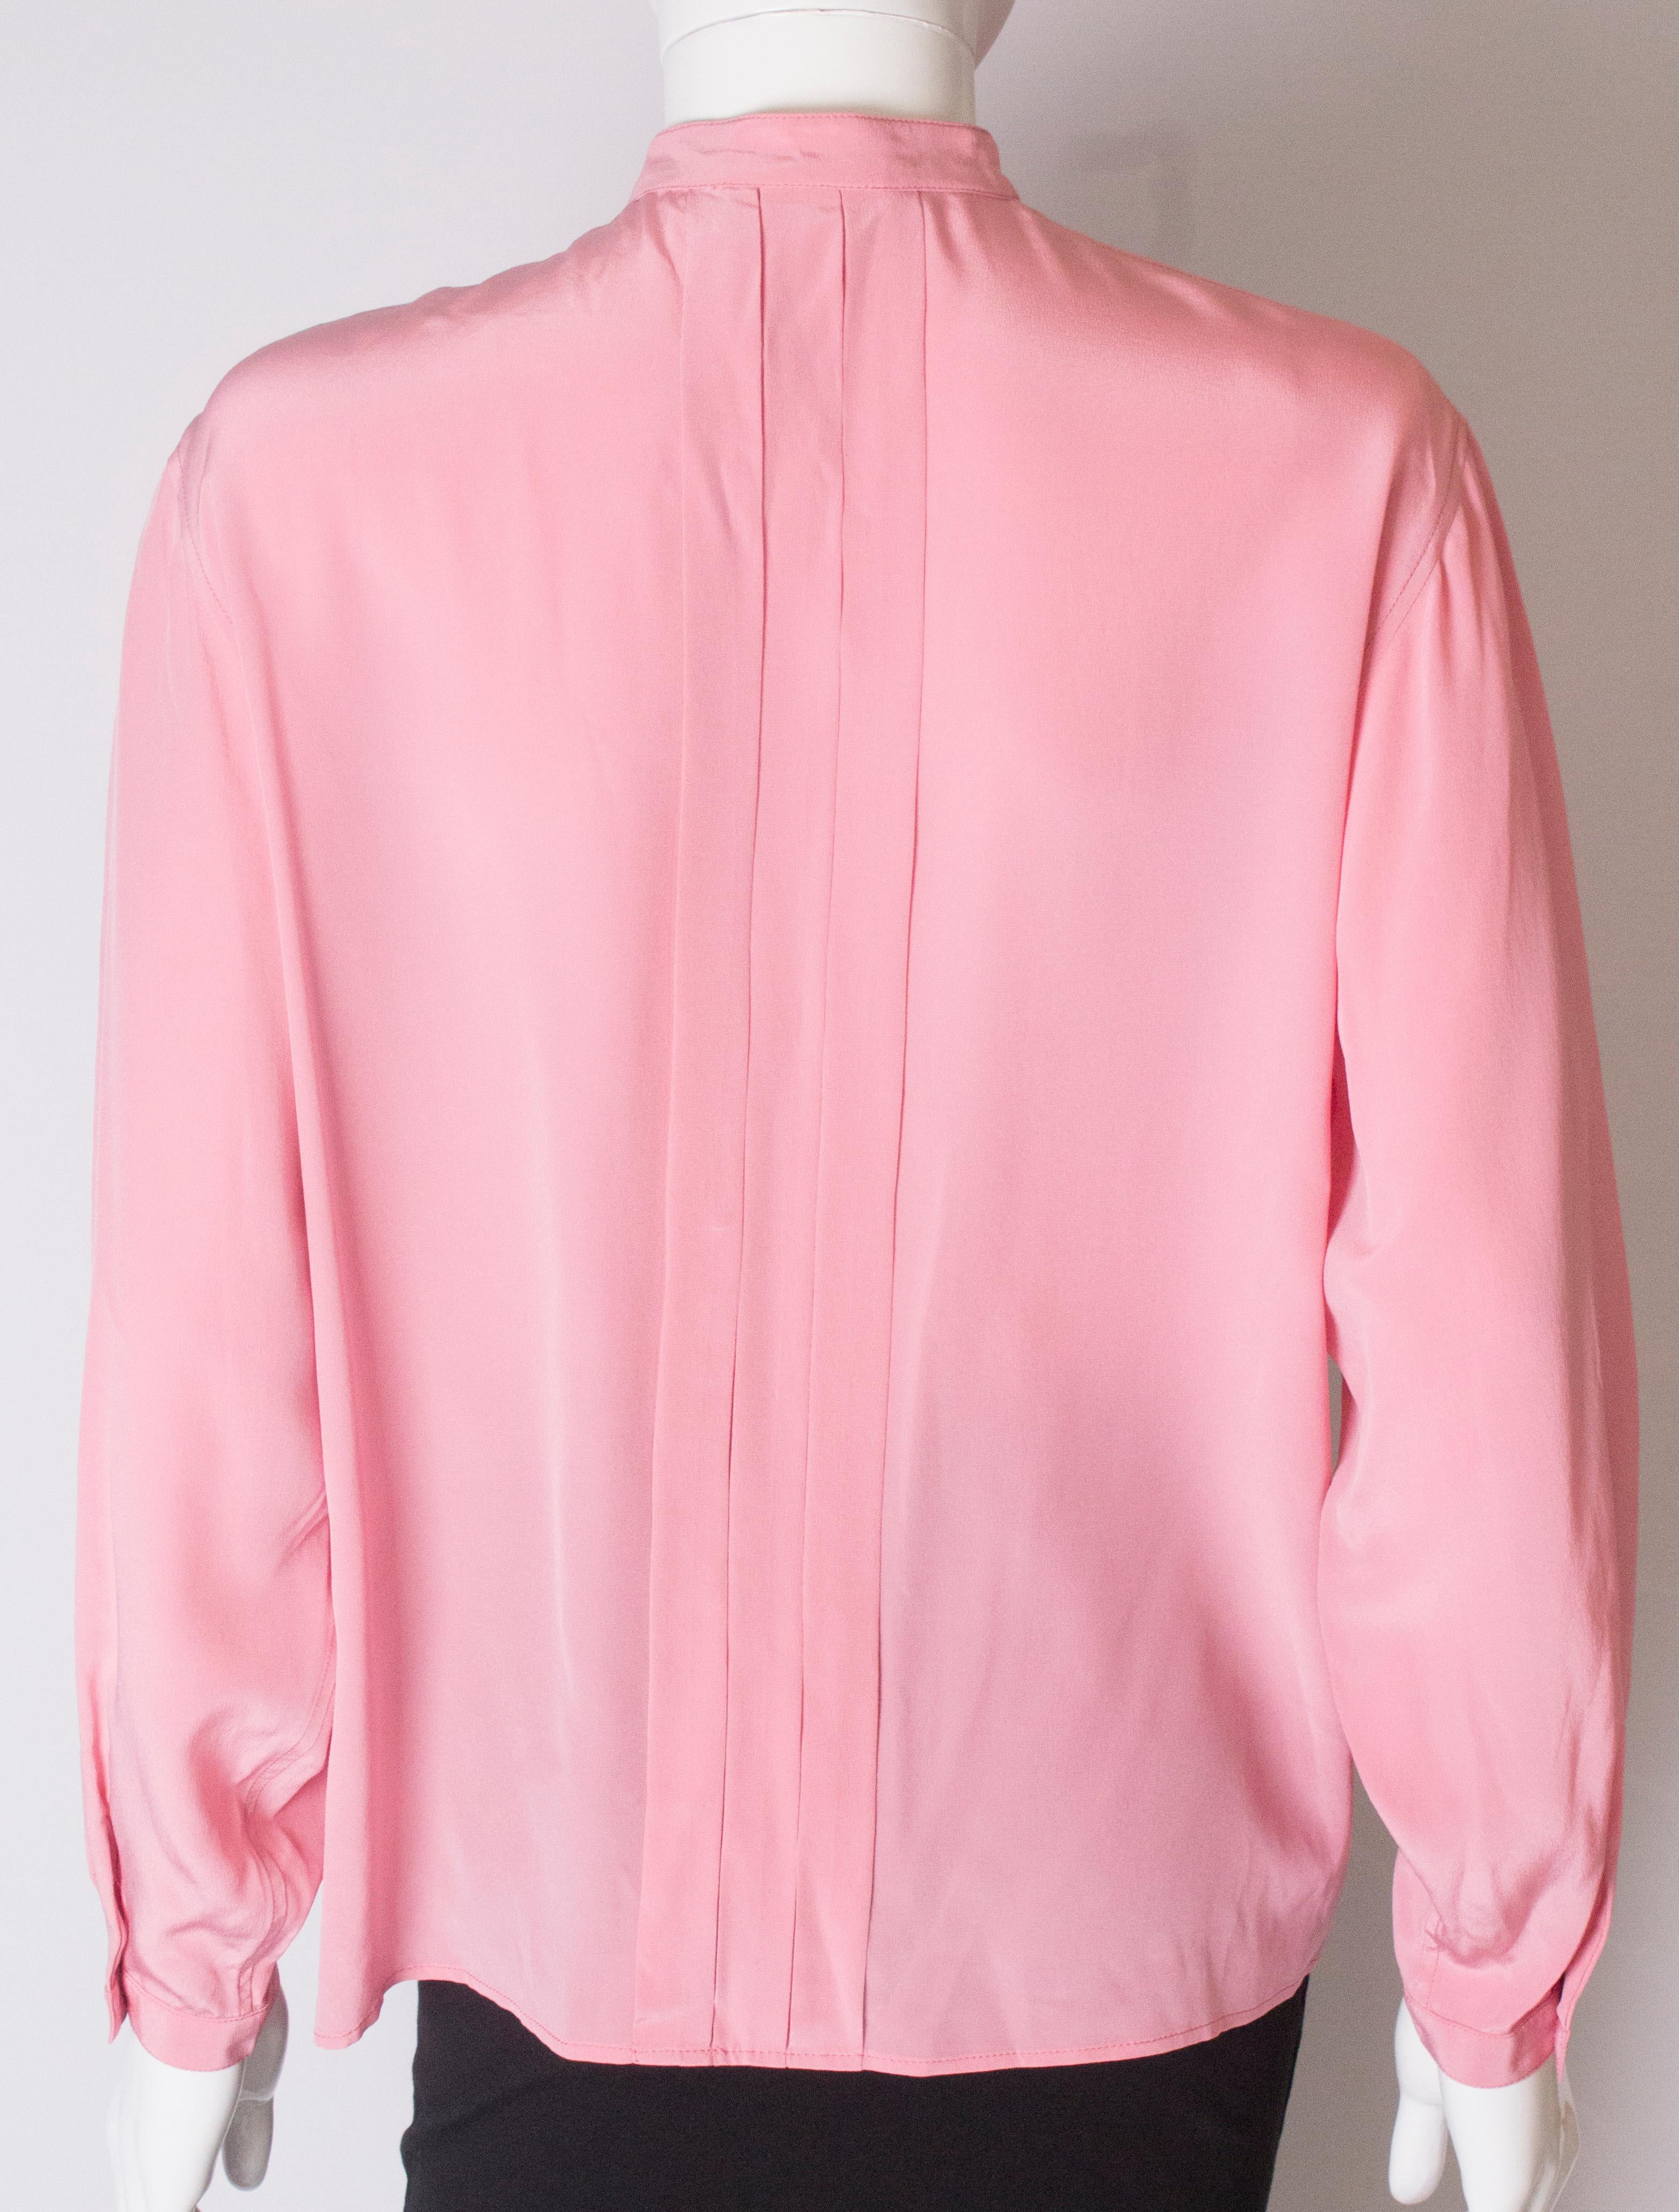 A Vintage 1990s pale pink silk button up blouse by Yves Saint Laurent  2